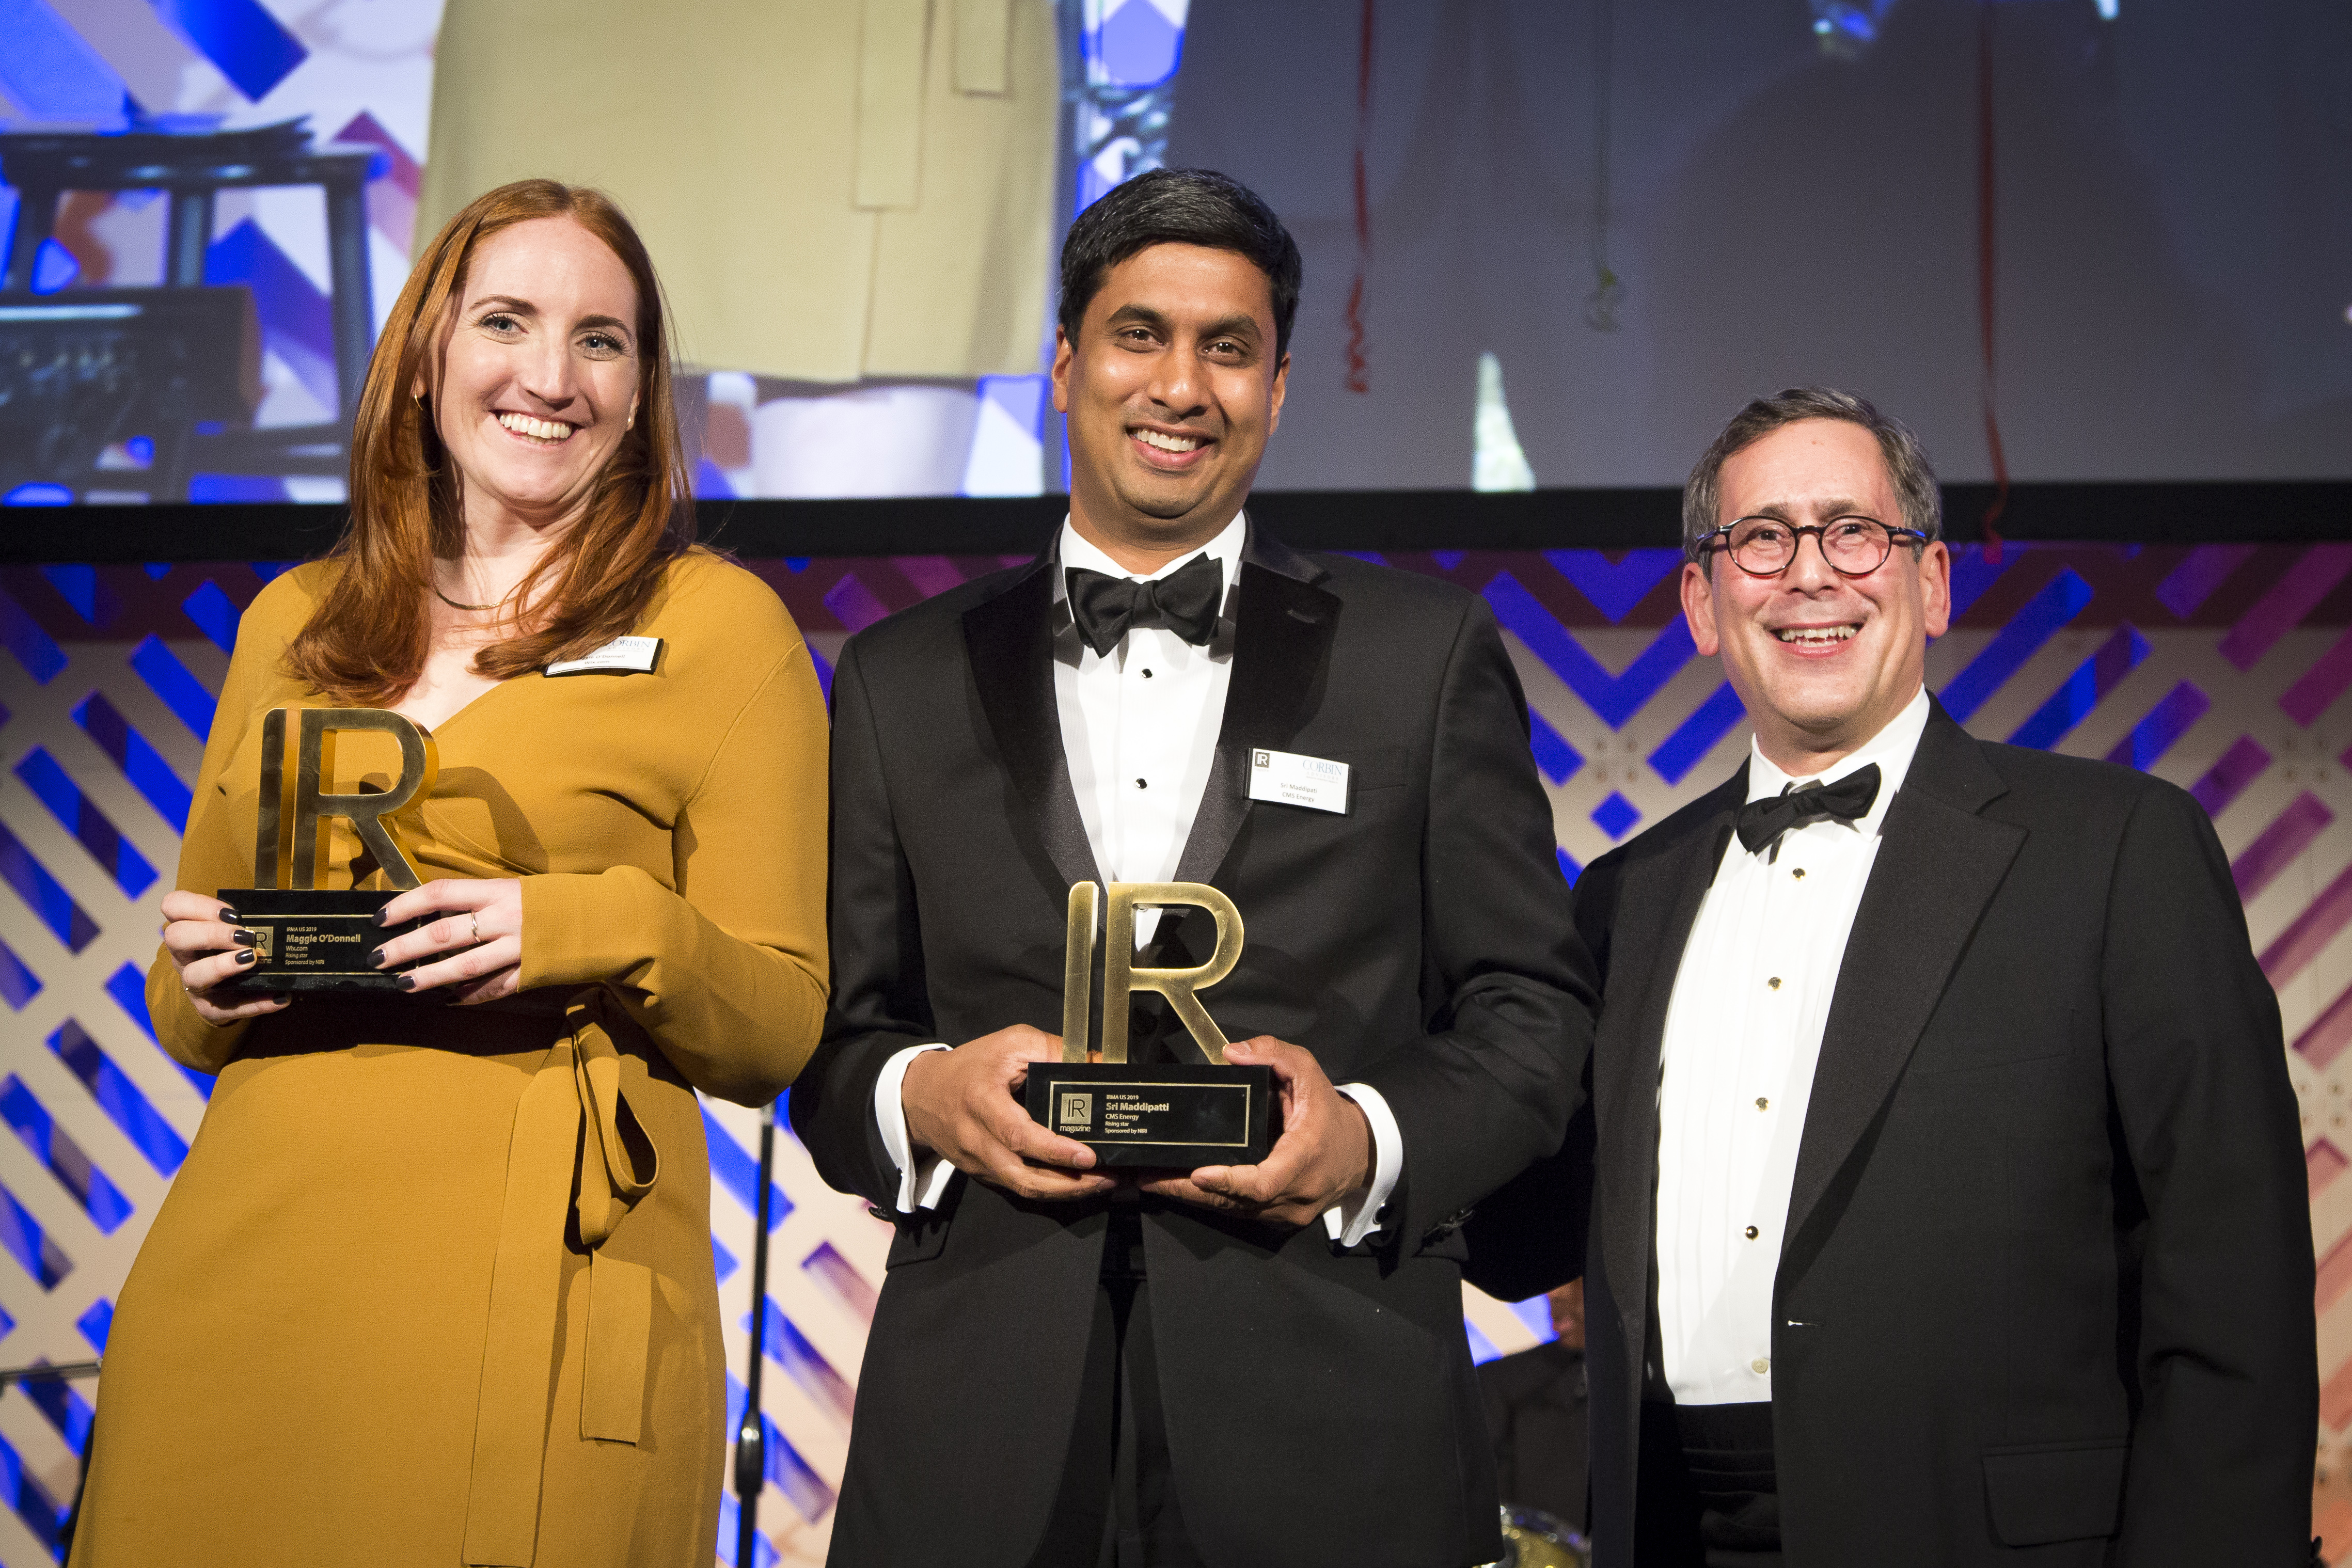 Sri Maddipati (center) shared the rising star award with Maggie O’Donnell at Wix.com in 2019